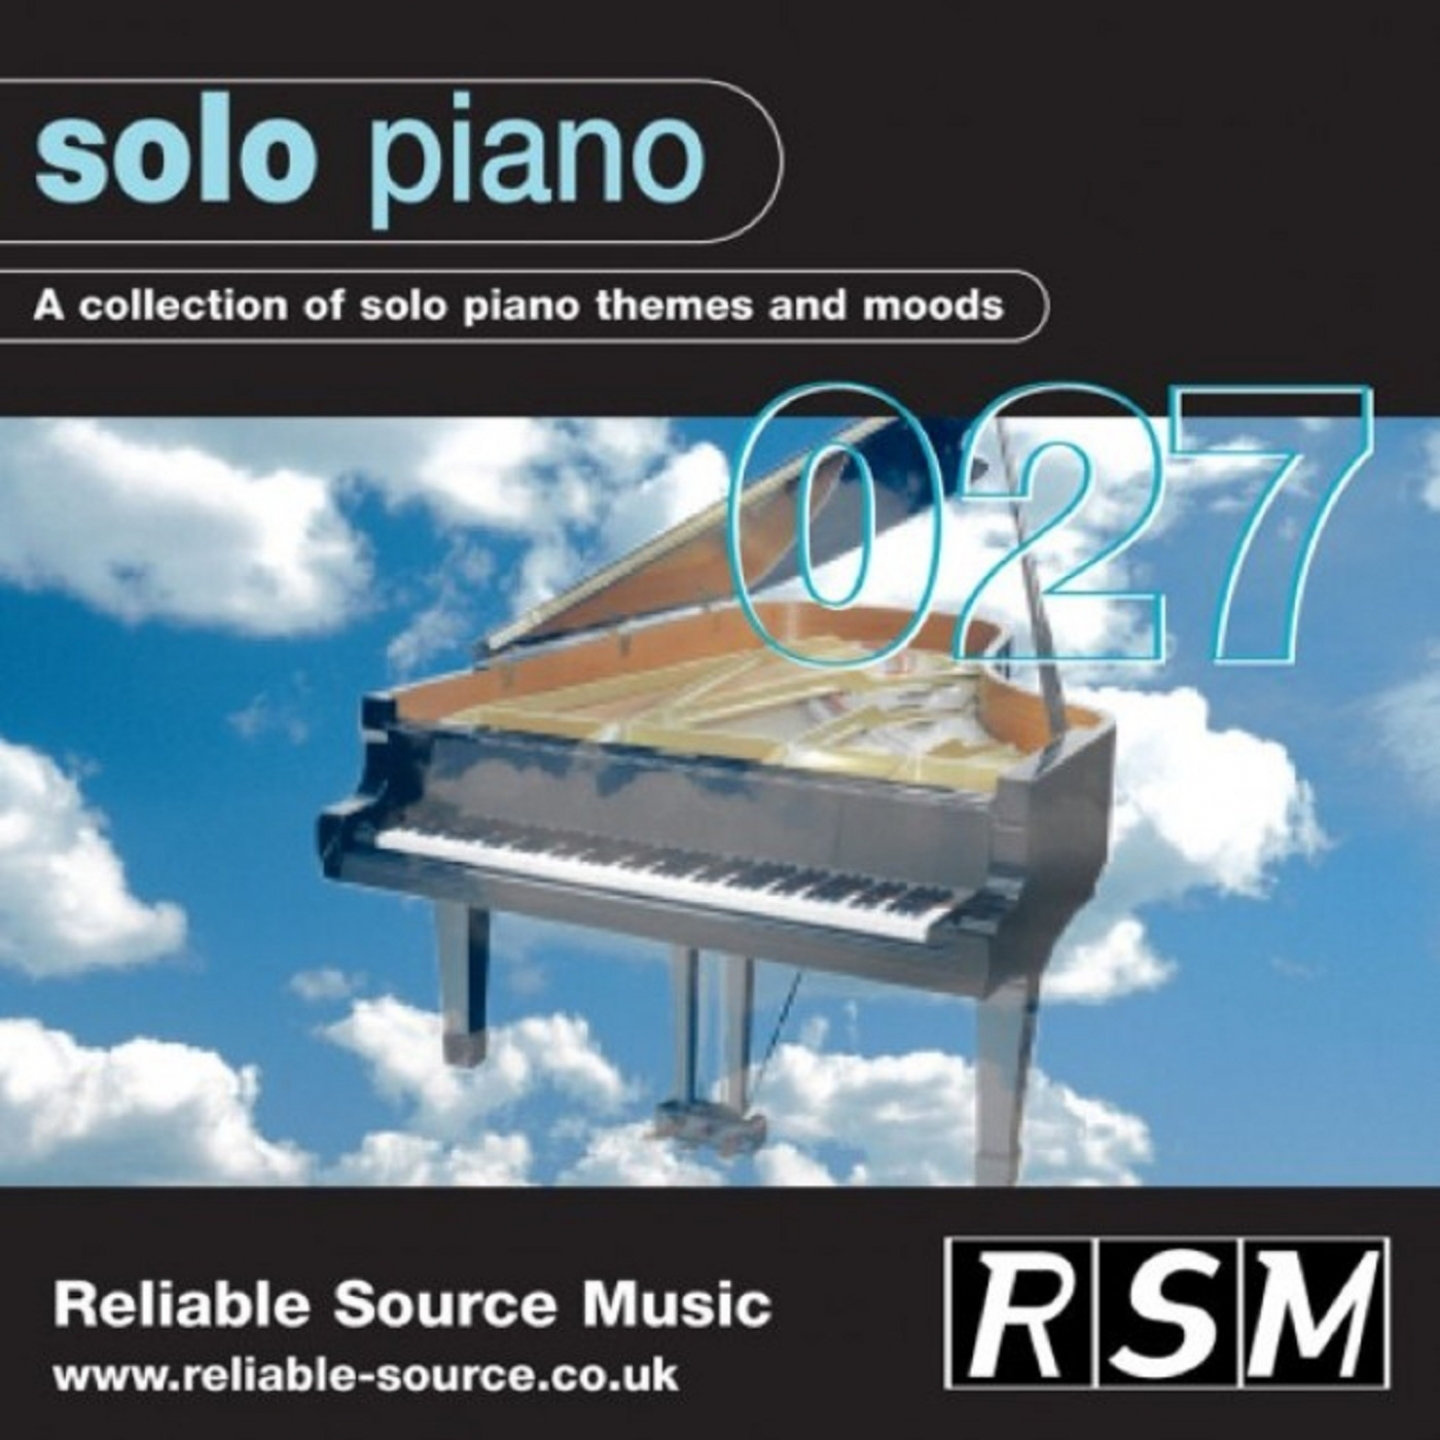 Solo collection. Piano Music альбомы. Study Piano Music. Source Music. Soundtrack solo Logic.